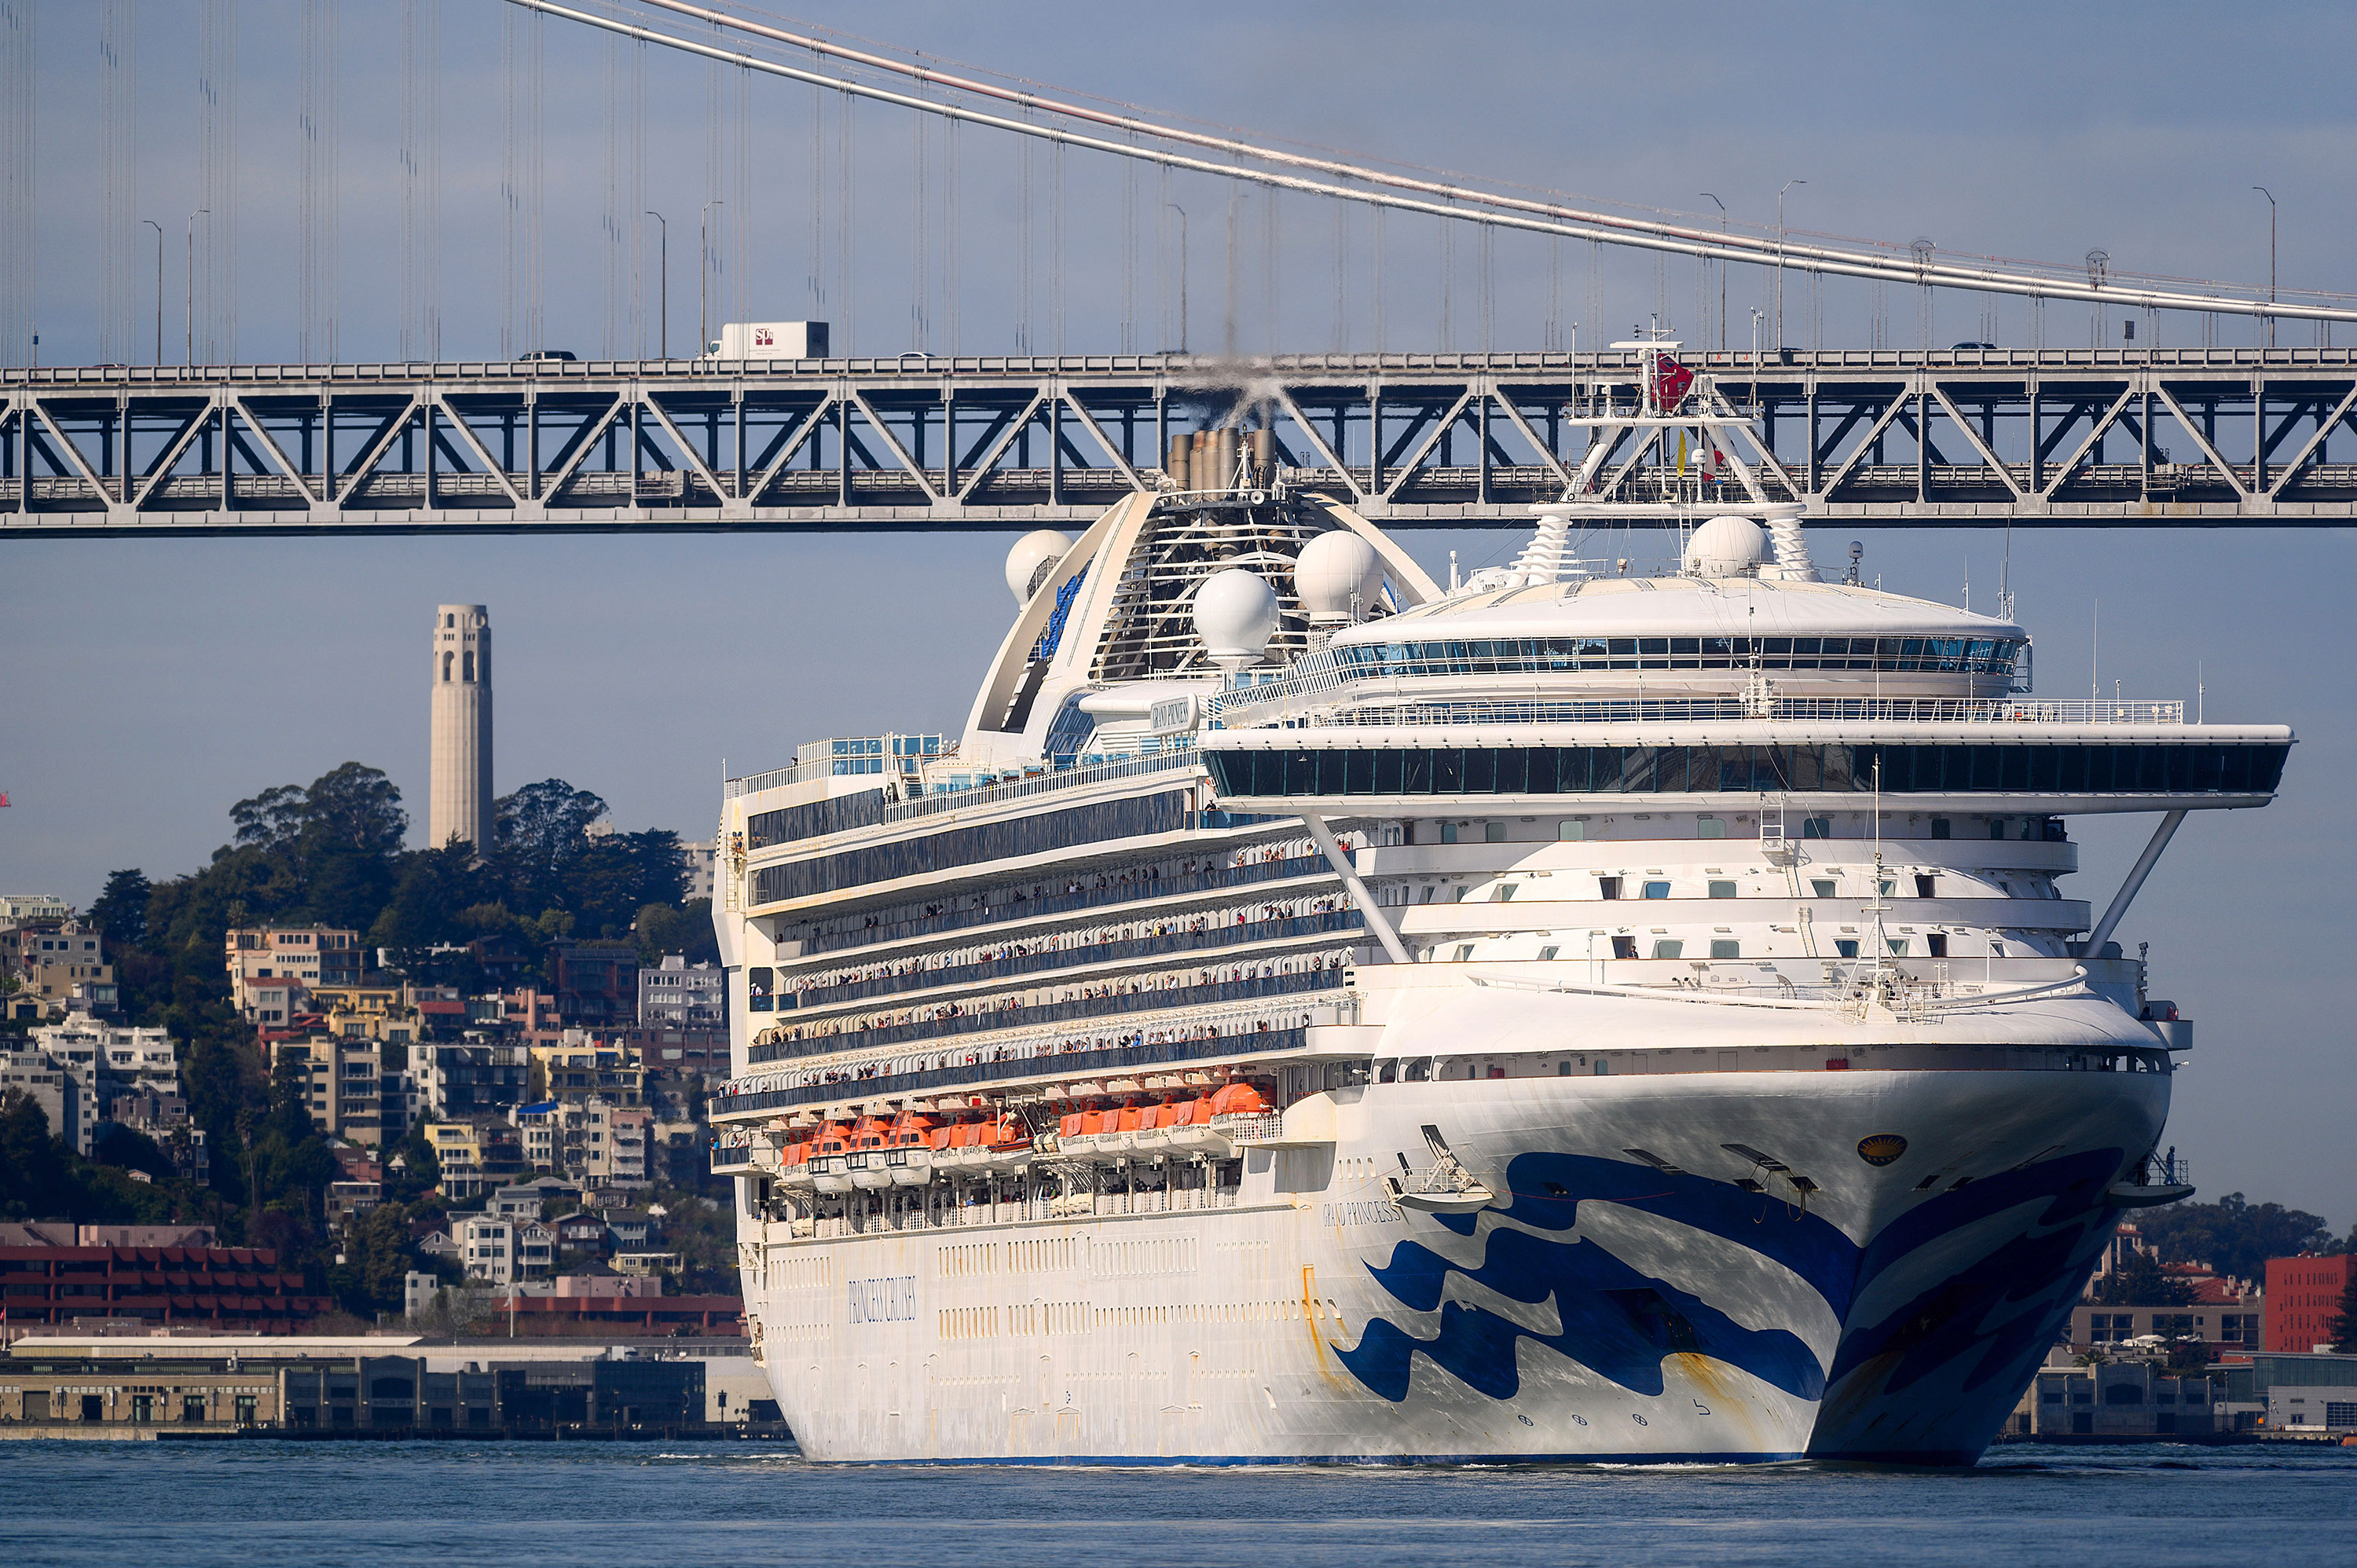 The Grand Princess docked in Oakland after days of being kept at sea due to concerns over coronavirus cases onboard. (Noah Berger/AP)